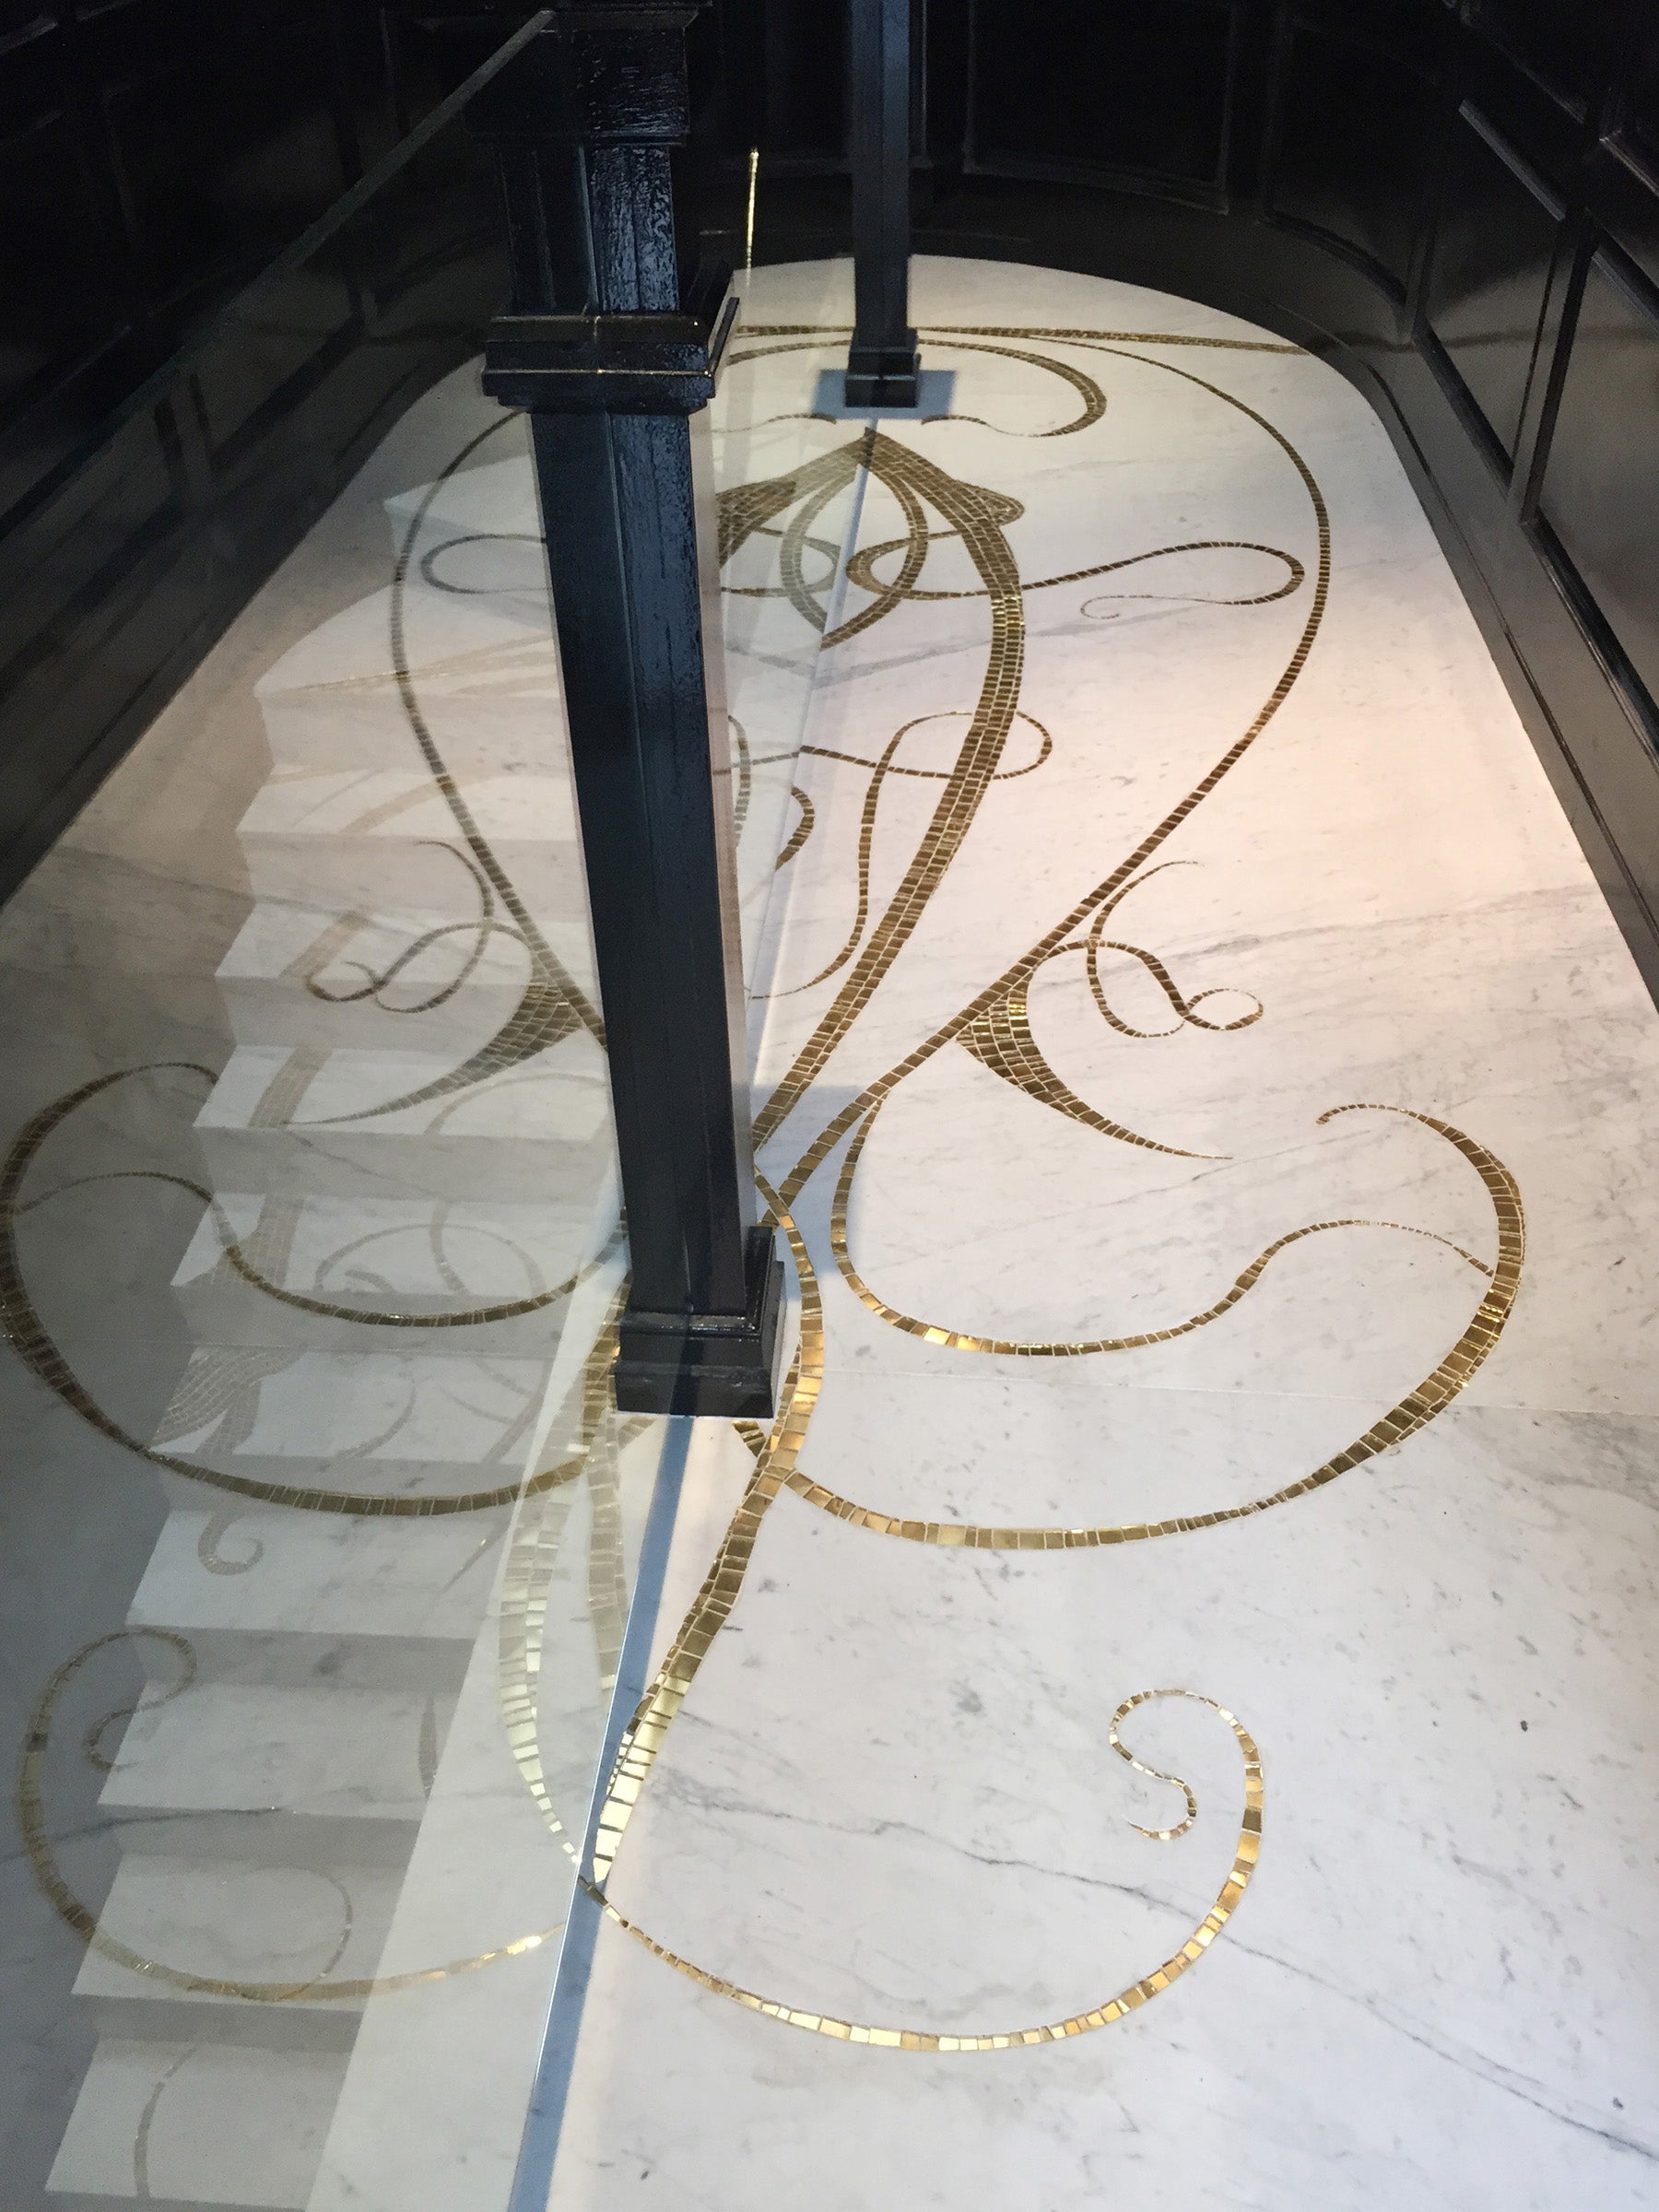 SOHO Penthouse Marble & Gold Mosaic Floor & Stairs, New York, N.Y. By Cathleen Newsham